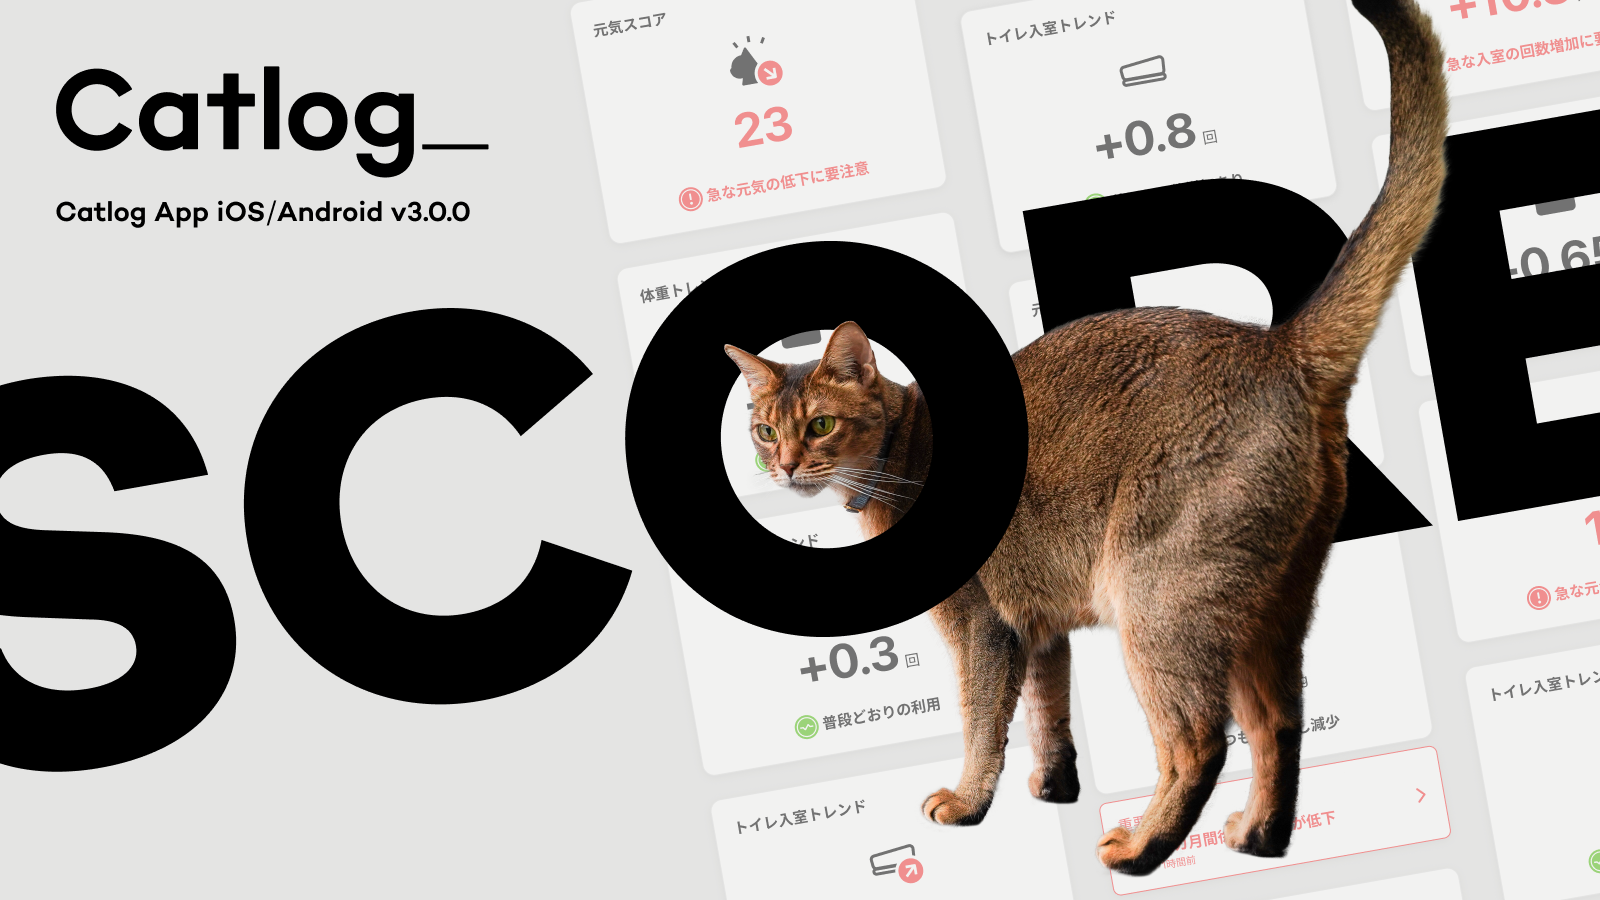 Catlog App iOS/Android v3.0.0